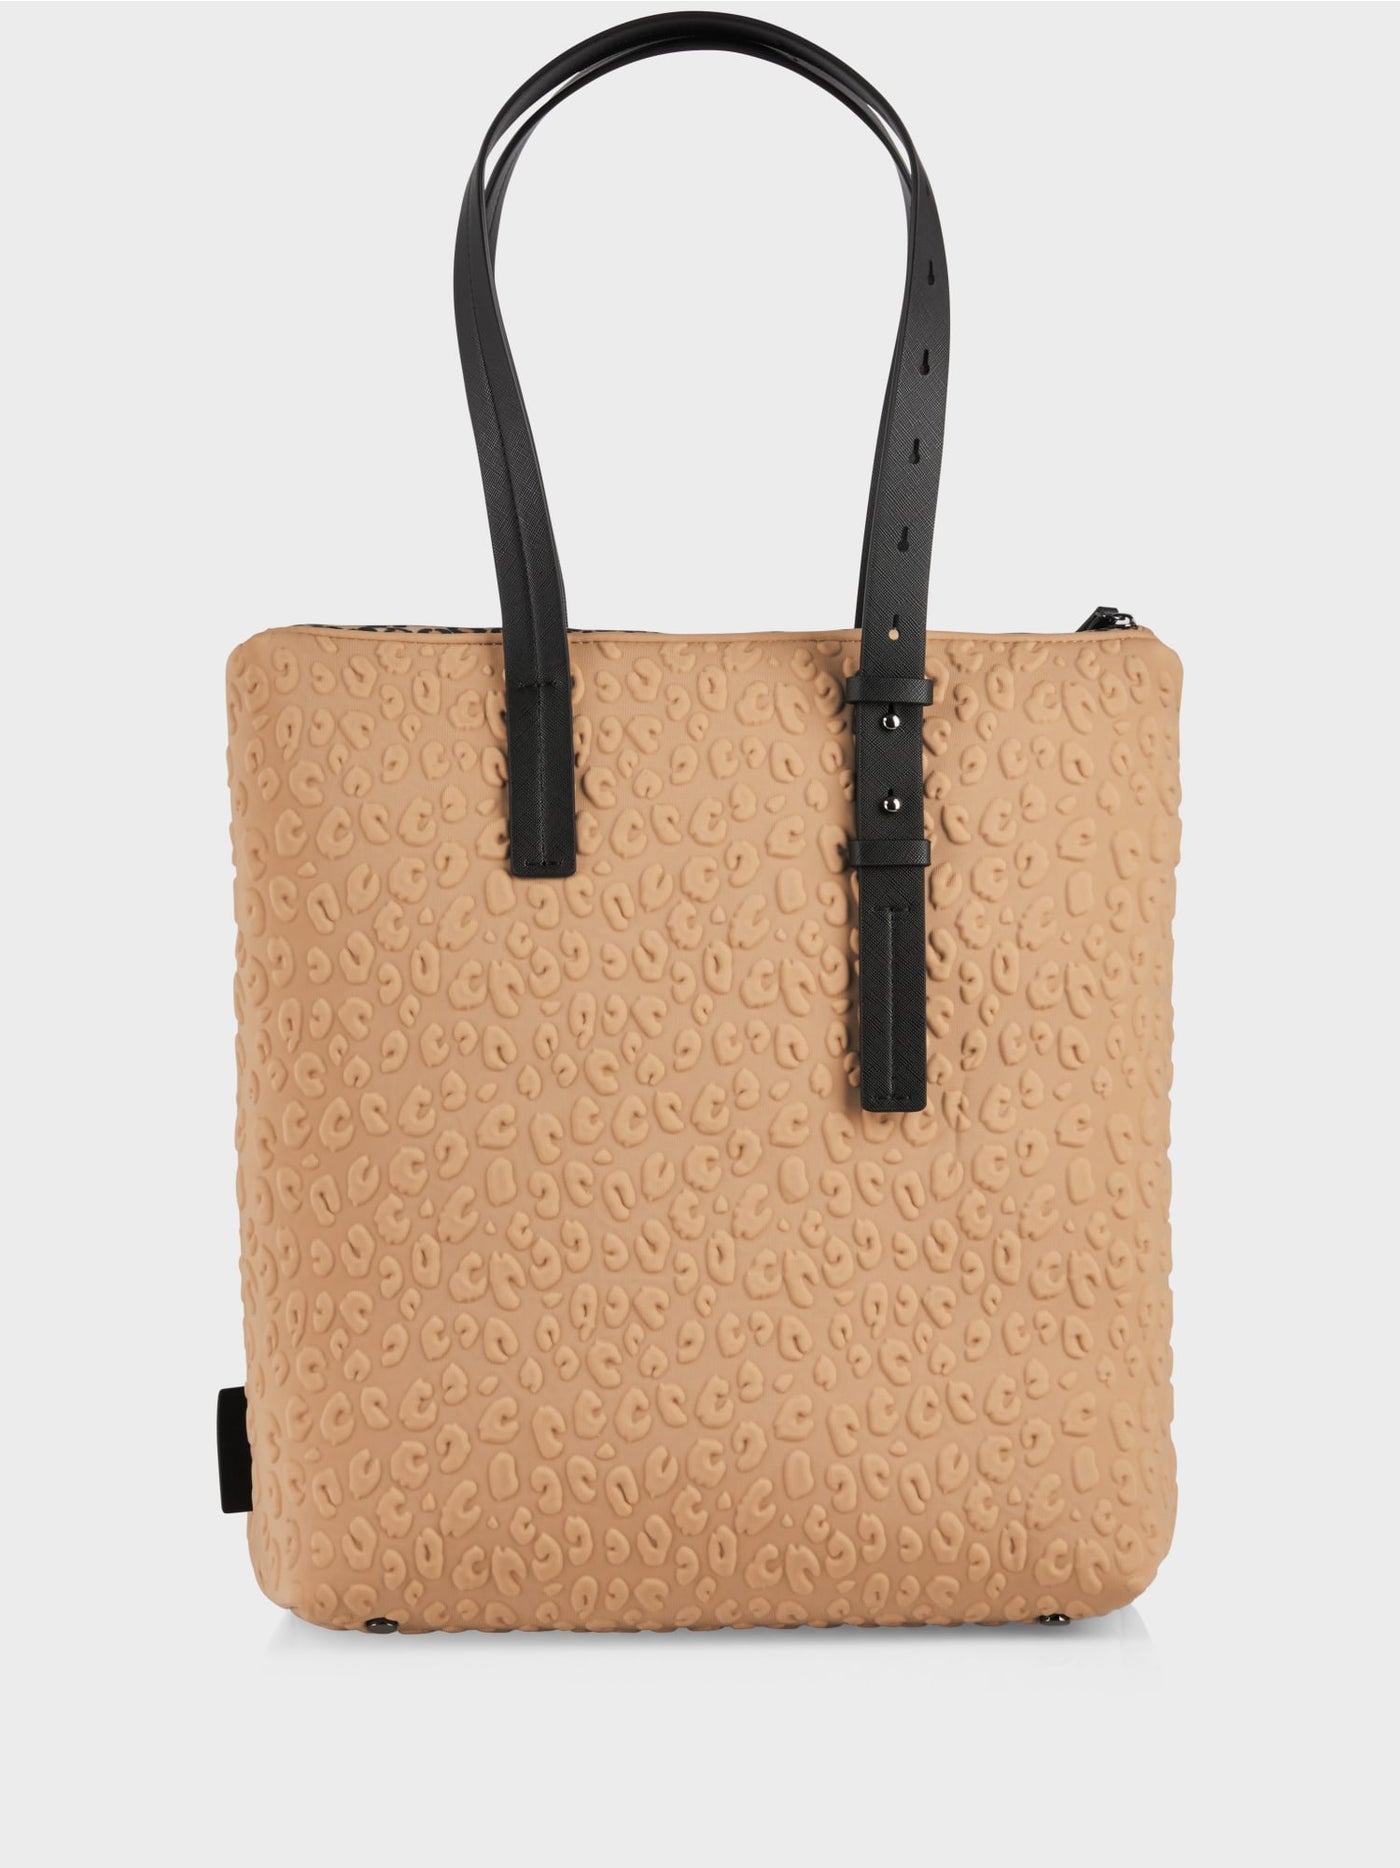 Marc Cain Beige Shopper made of techno material